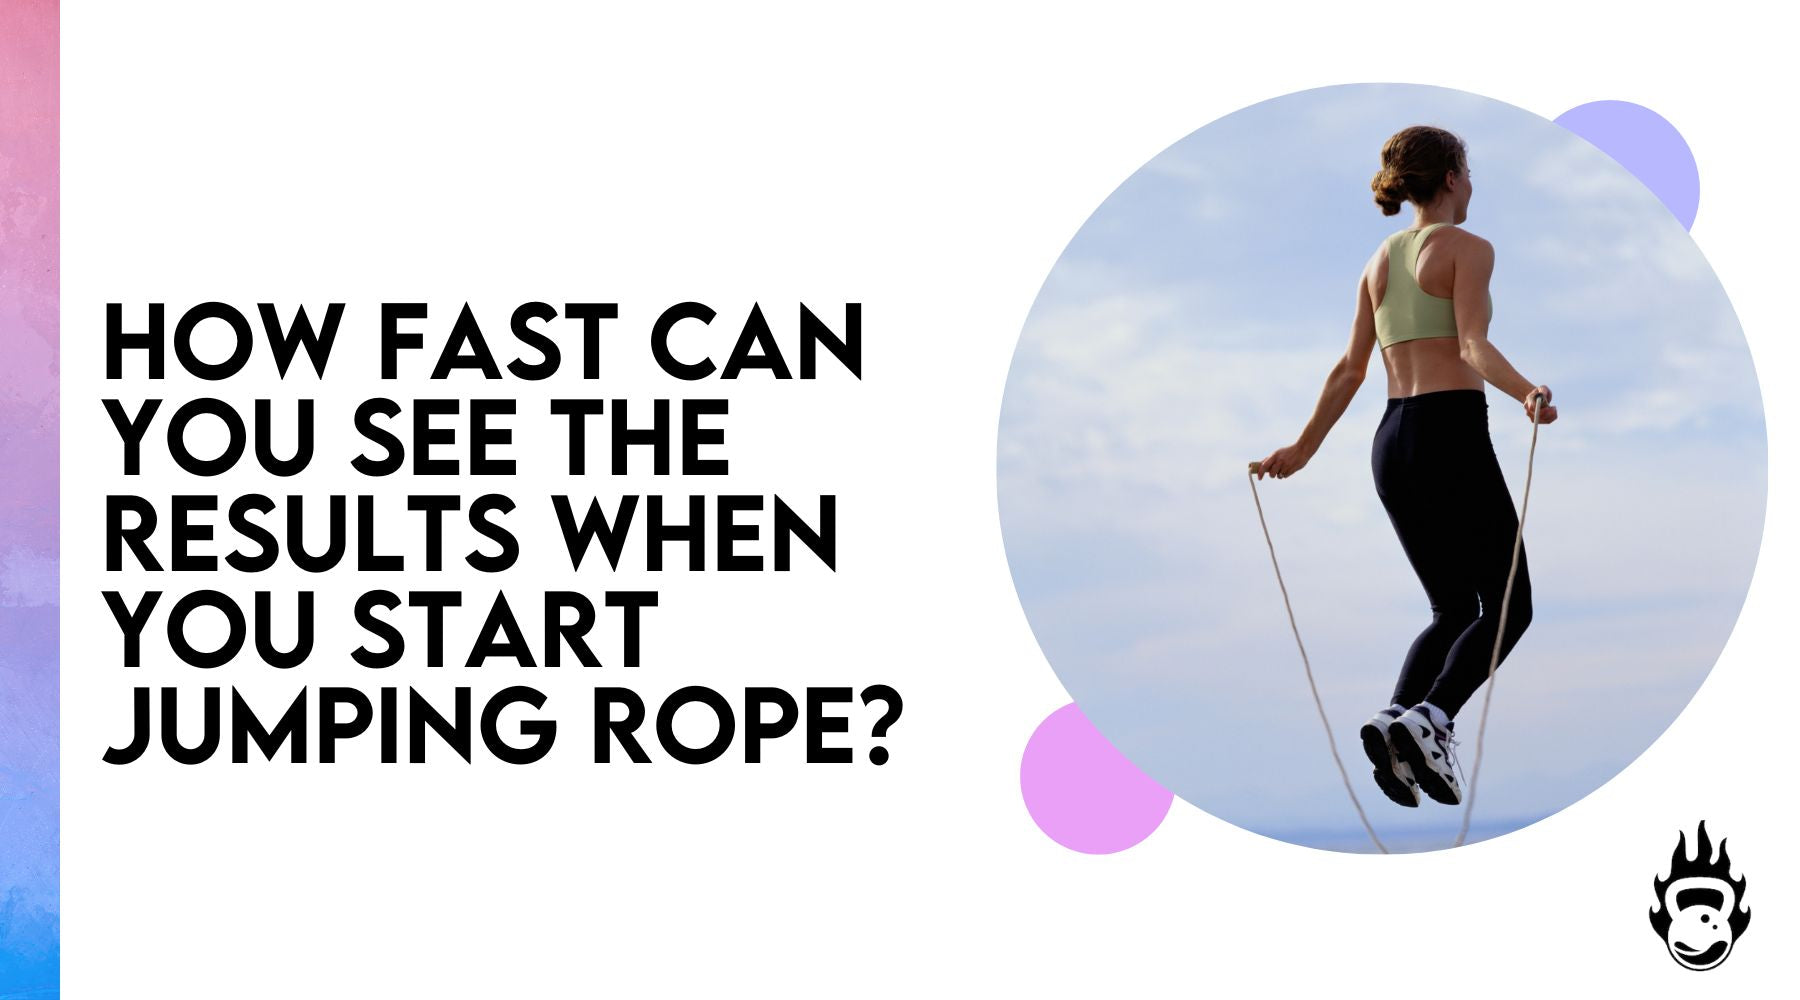 How fast can you see the results when you start jumping rope?